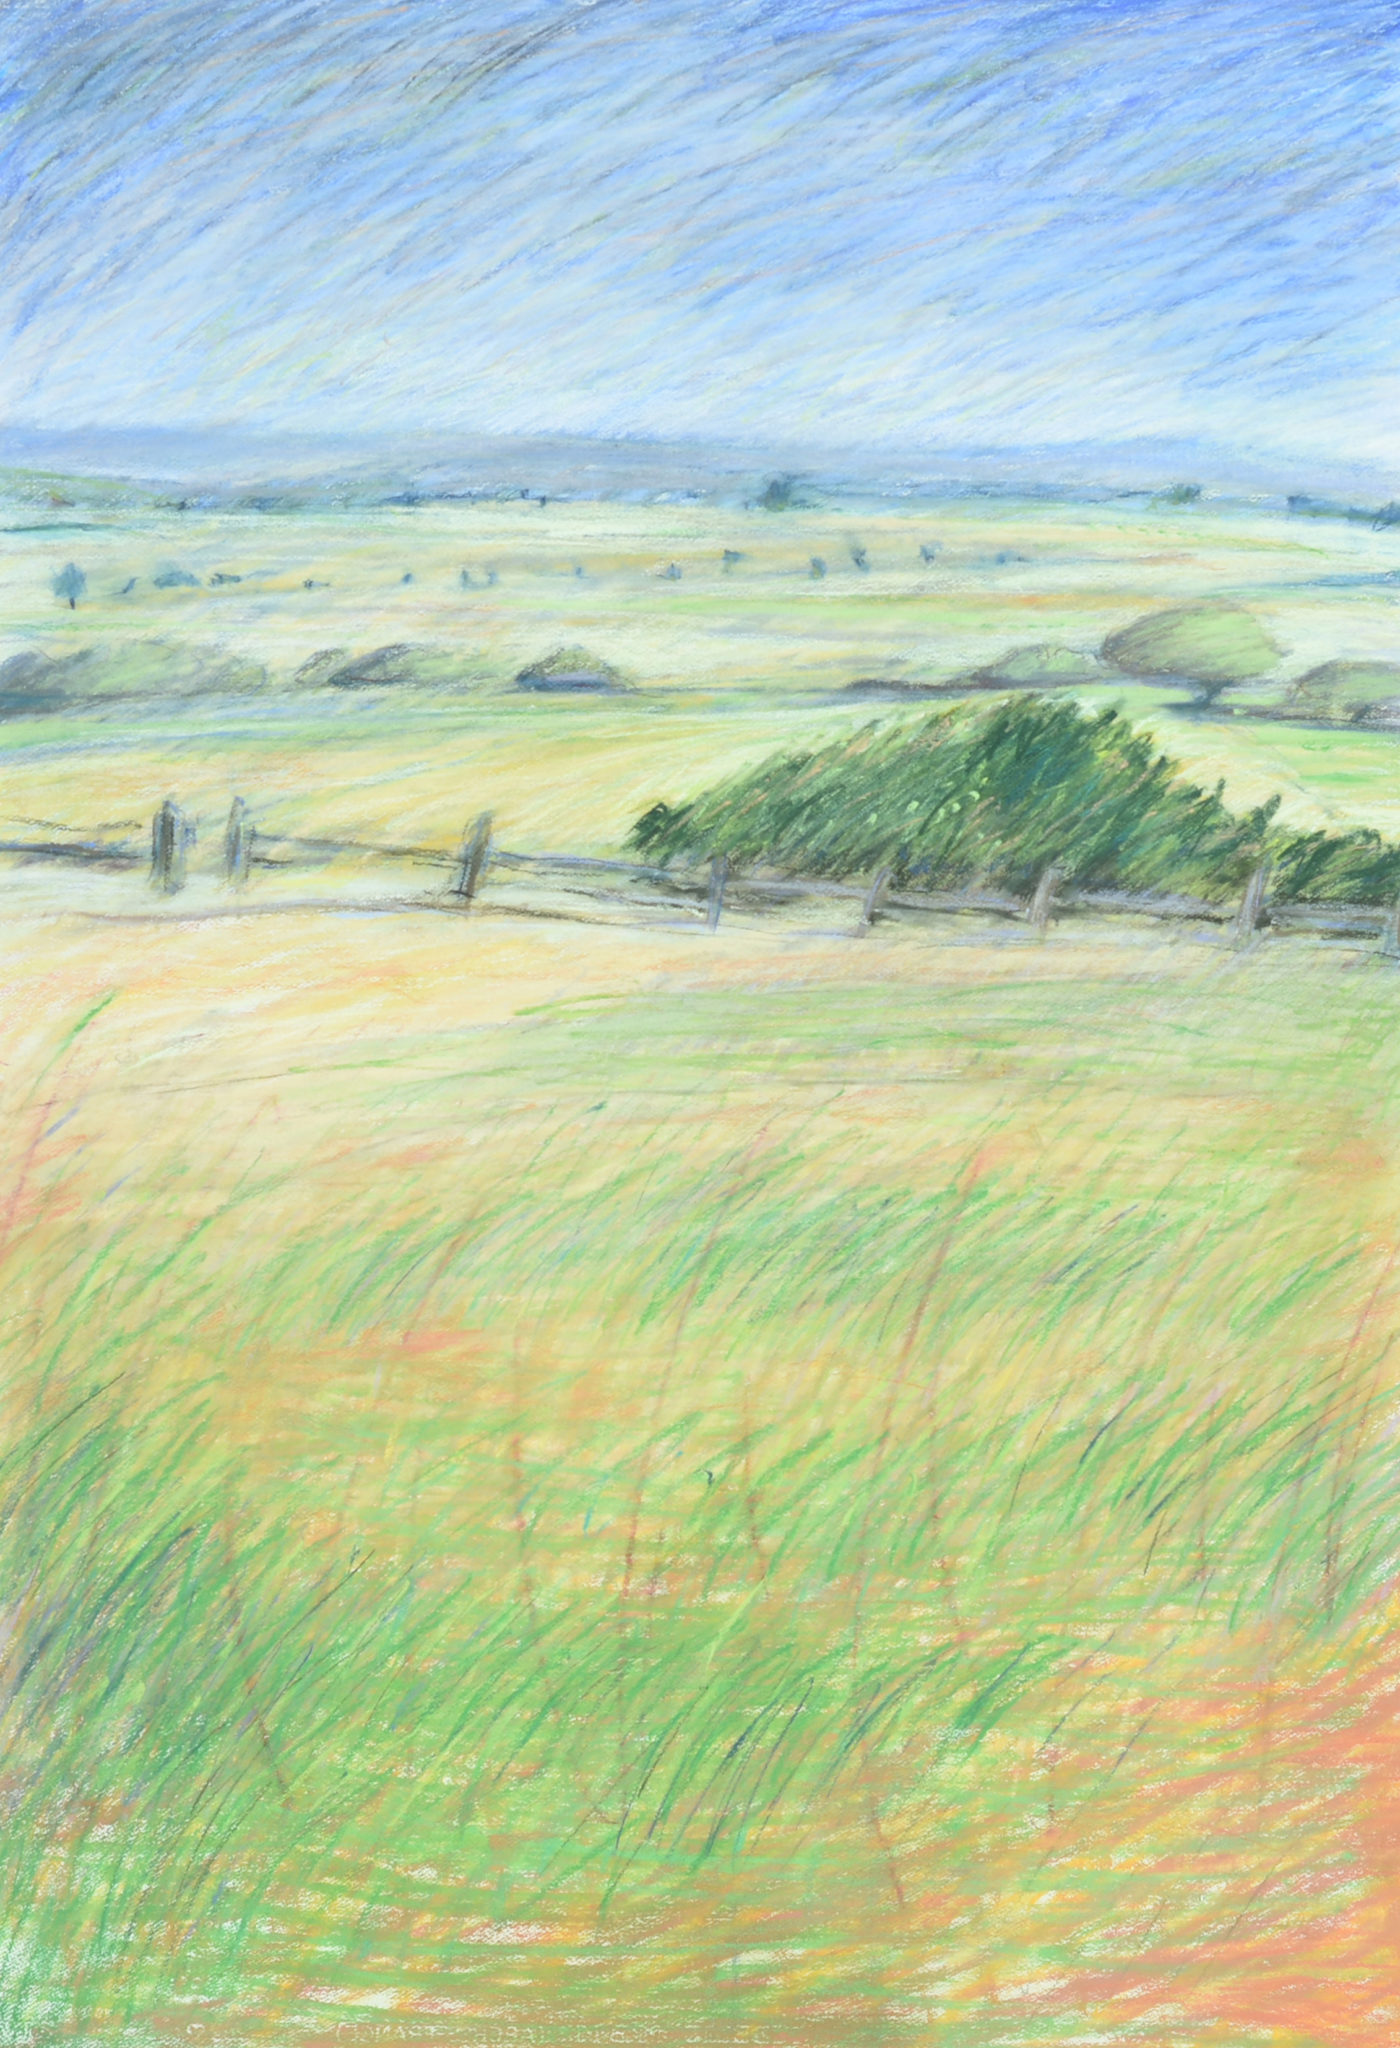 Julie Rosewarne Foster, View to the South, 1985, Pastel on paper, 106 x 73 cm, Latrobe Regional Gallery Collection, purchased with assistance of the Australia Council, 1986.